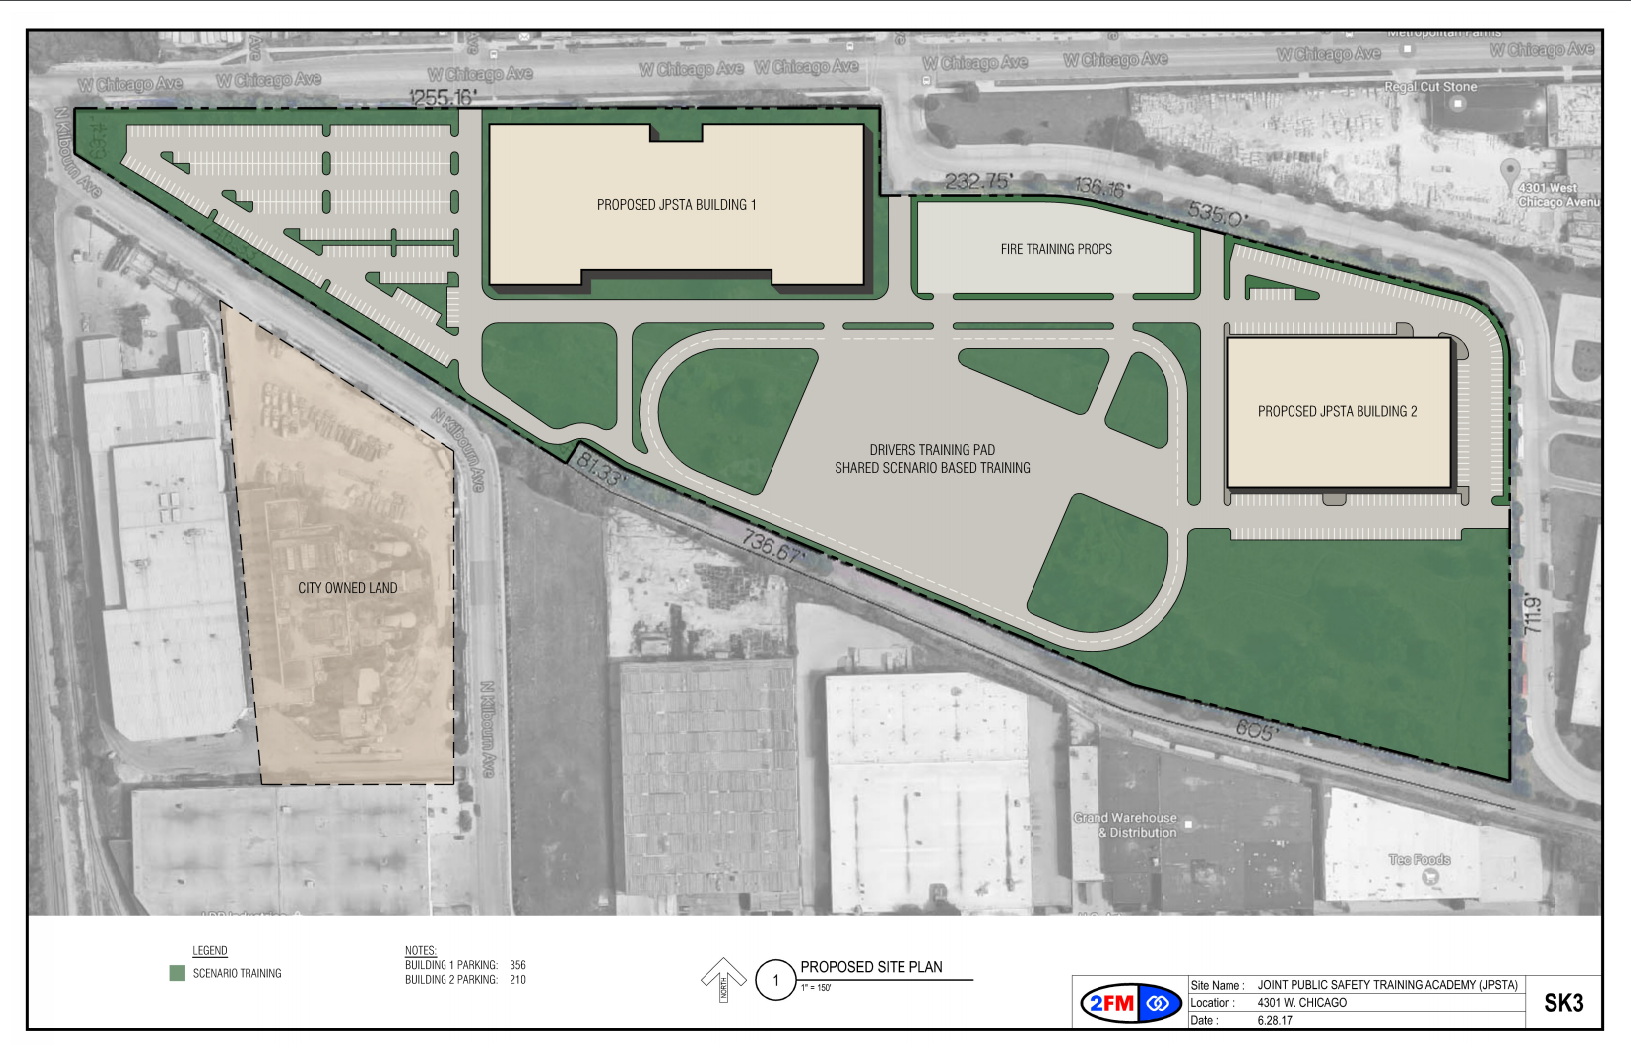 The new police training academy will be built in Chicago's West Garfield Park. (Photo: City of Chicago)